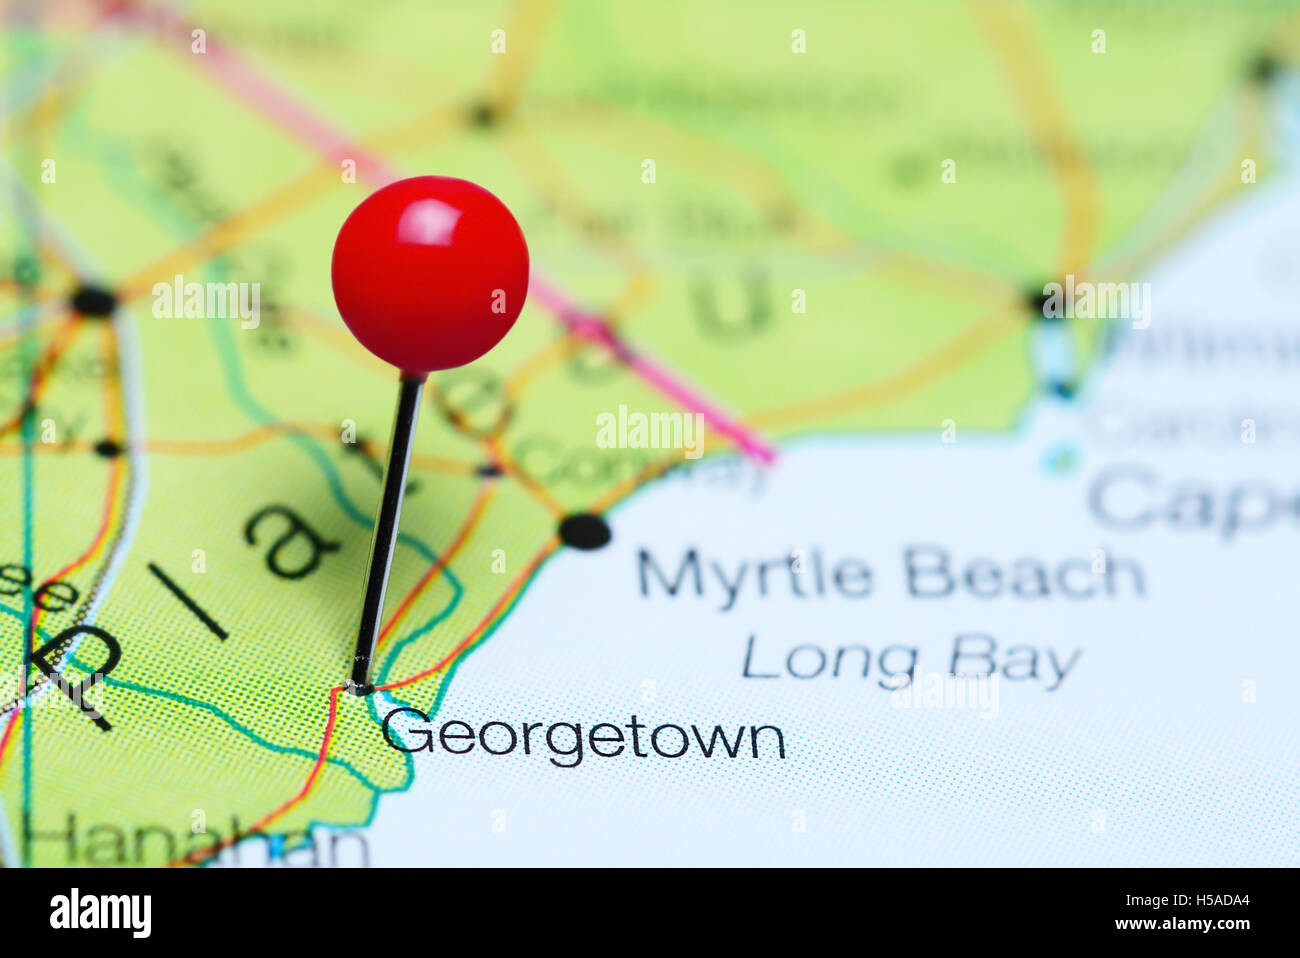 Georgetown pinned on a map of South Carolina, USA Stock Photo